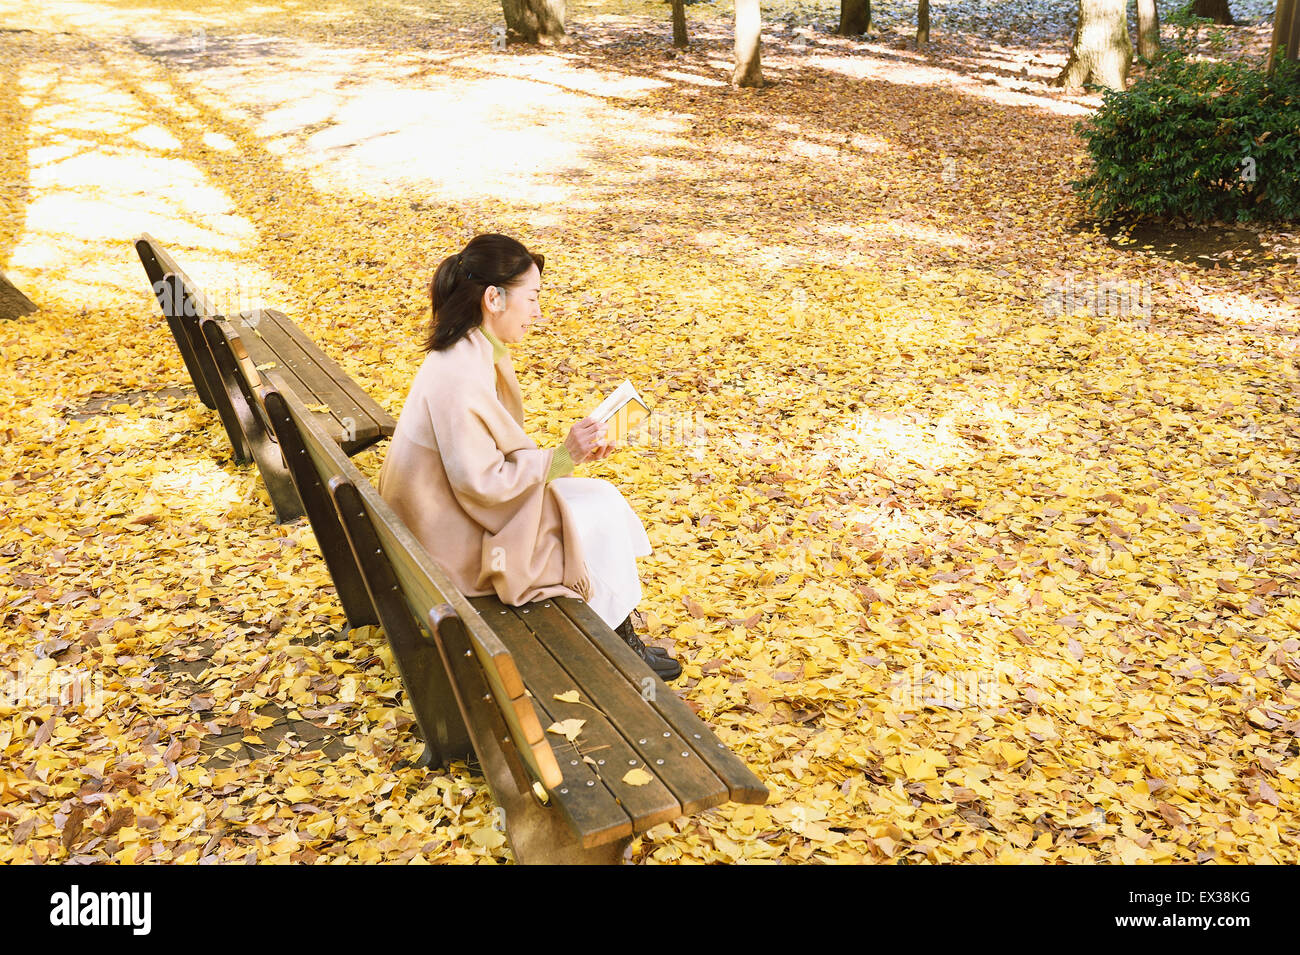 Senior Japanese woman sitting on a bench with a book in a city park in Autumn Stock Photo